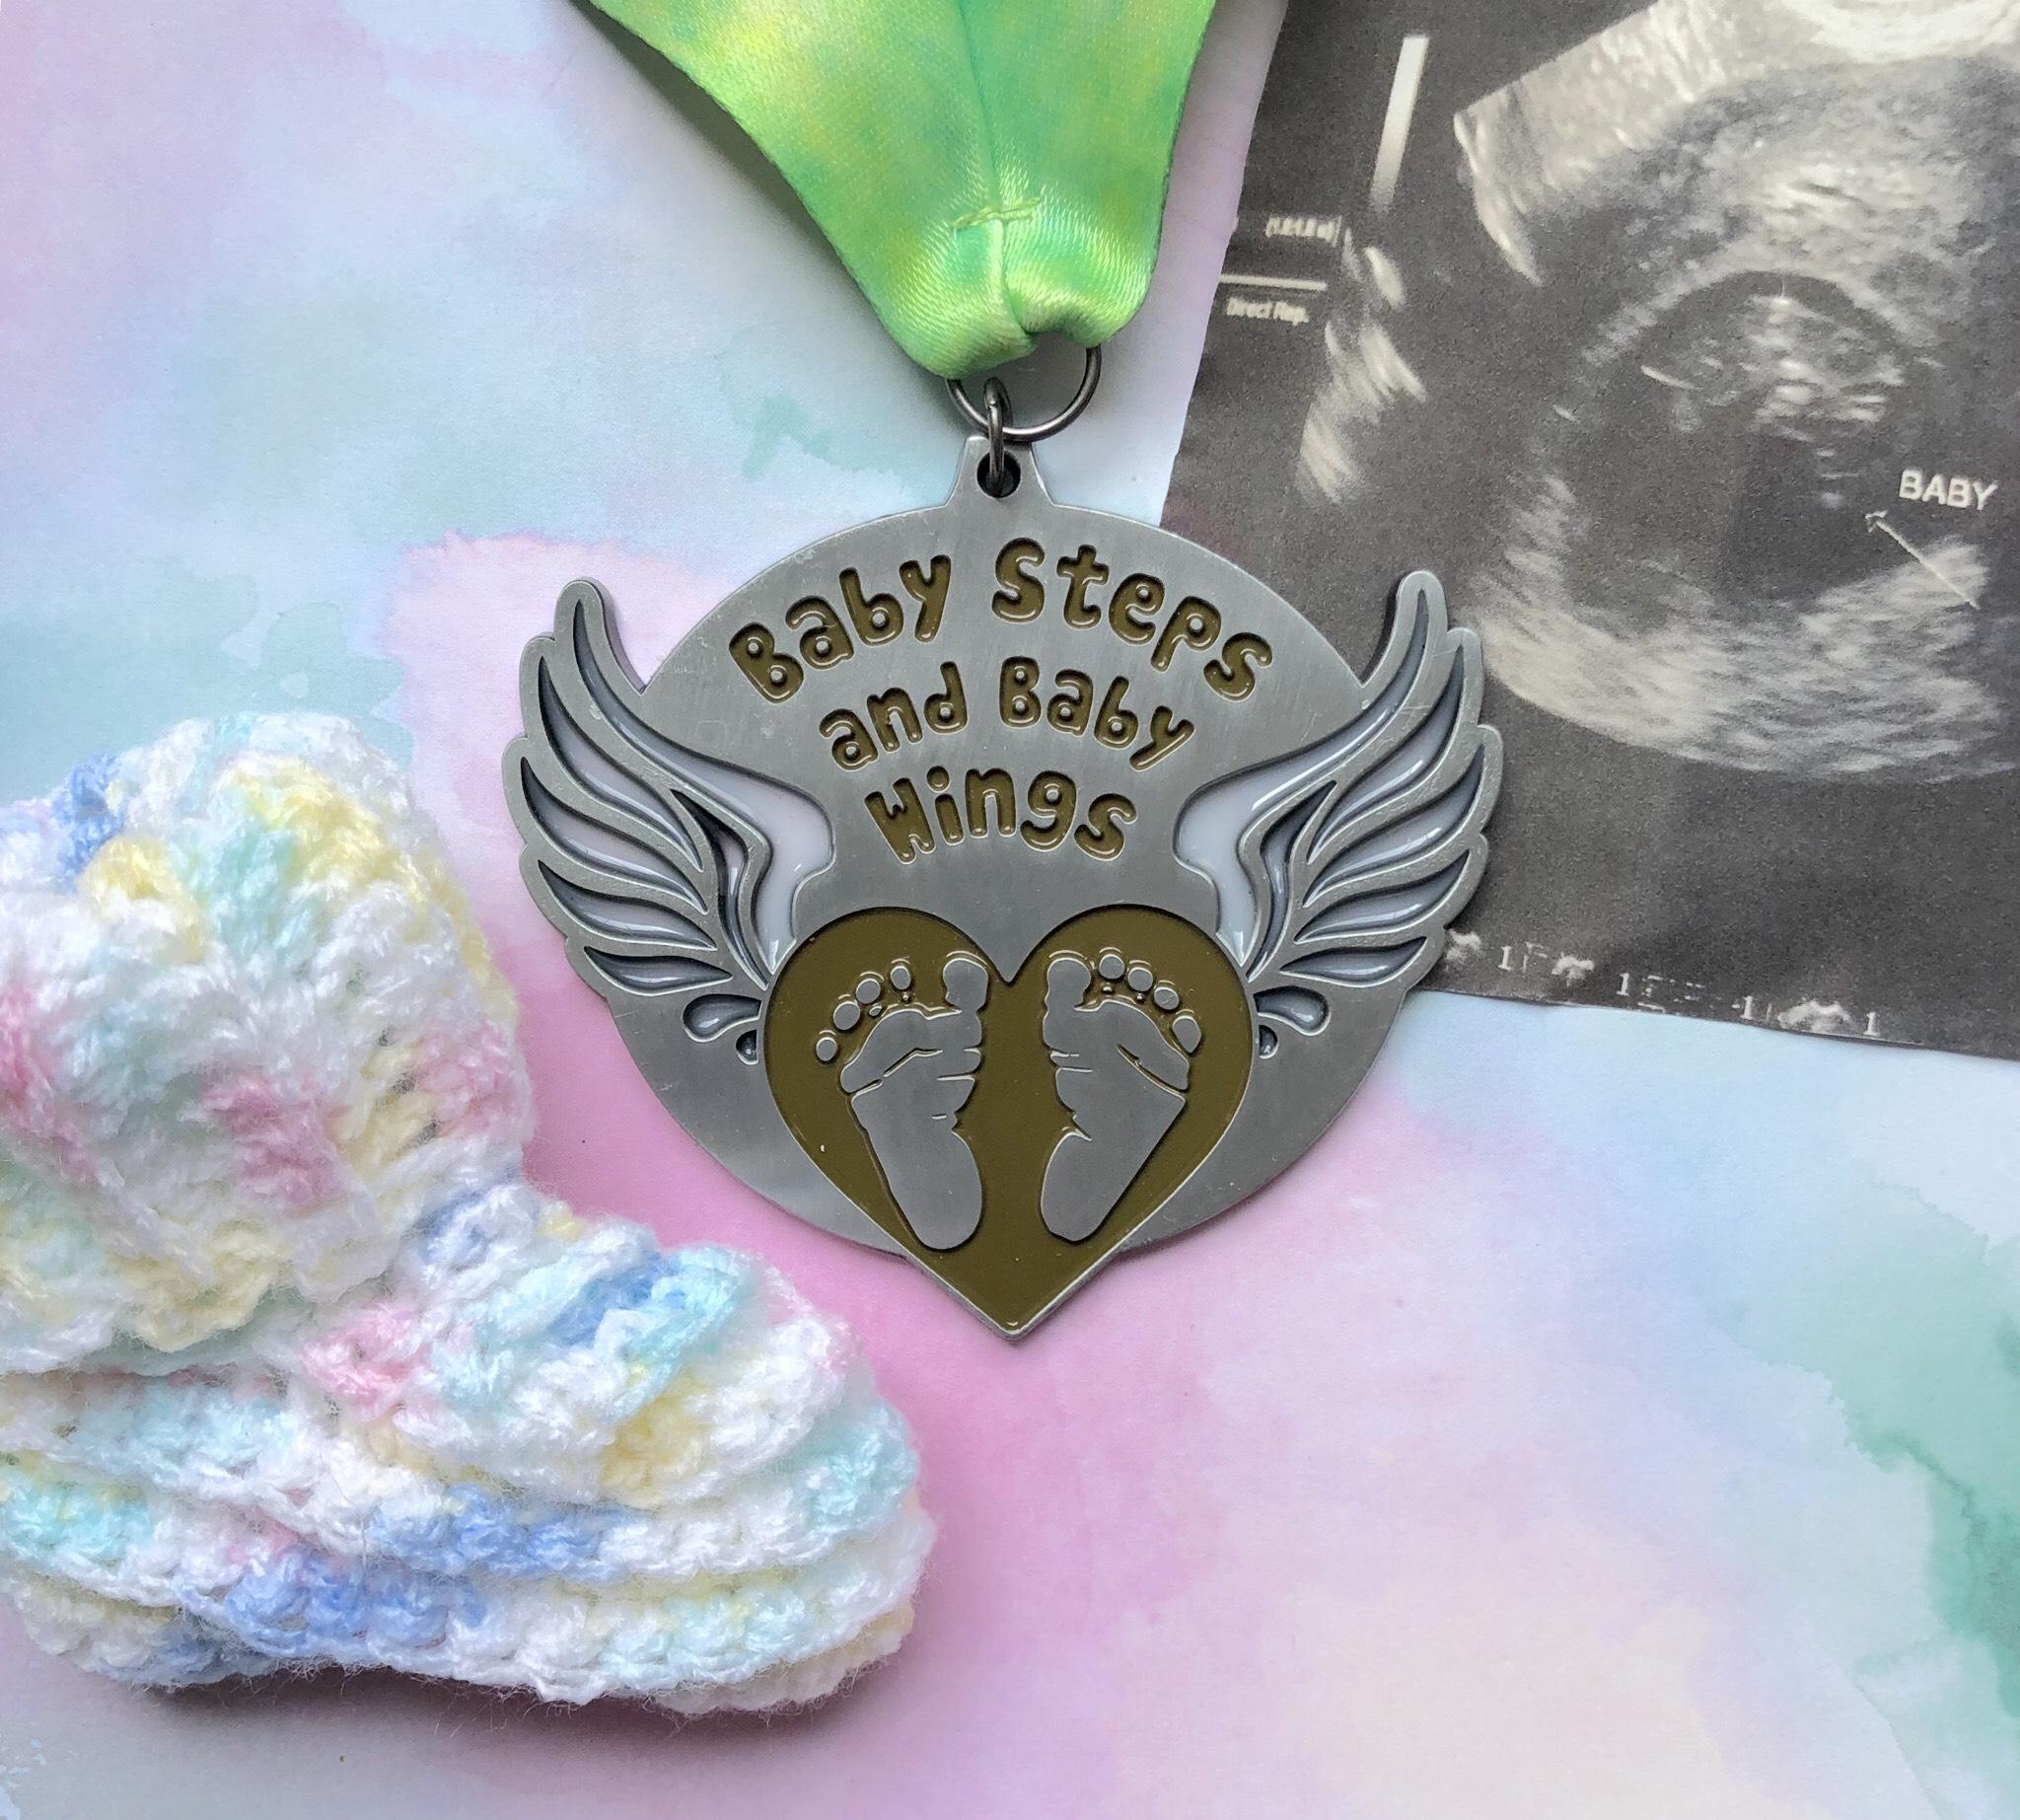 Now Only $8! Baby Steps/Baby Wings 1M/5K/10K, 13.1/26.2 -Annapolis